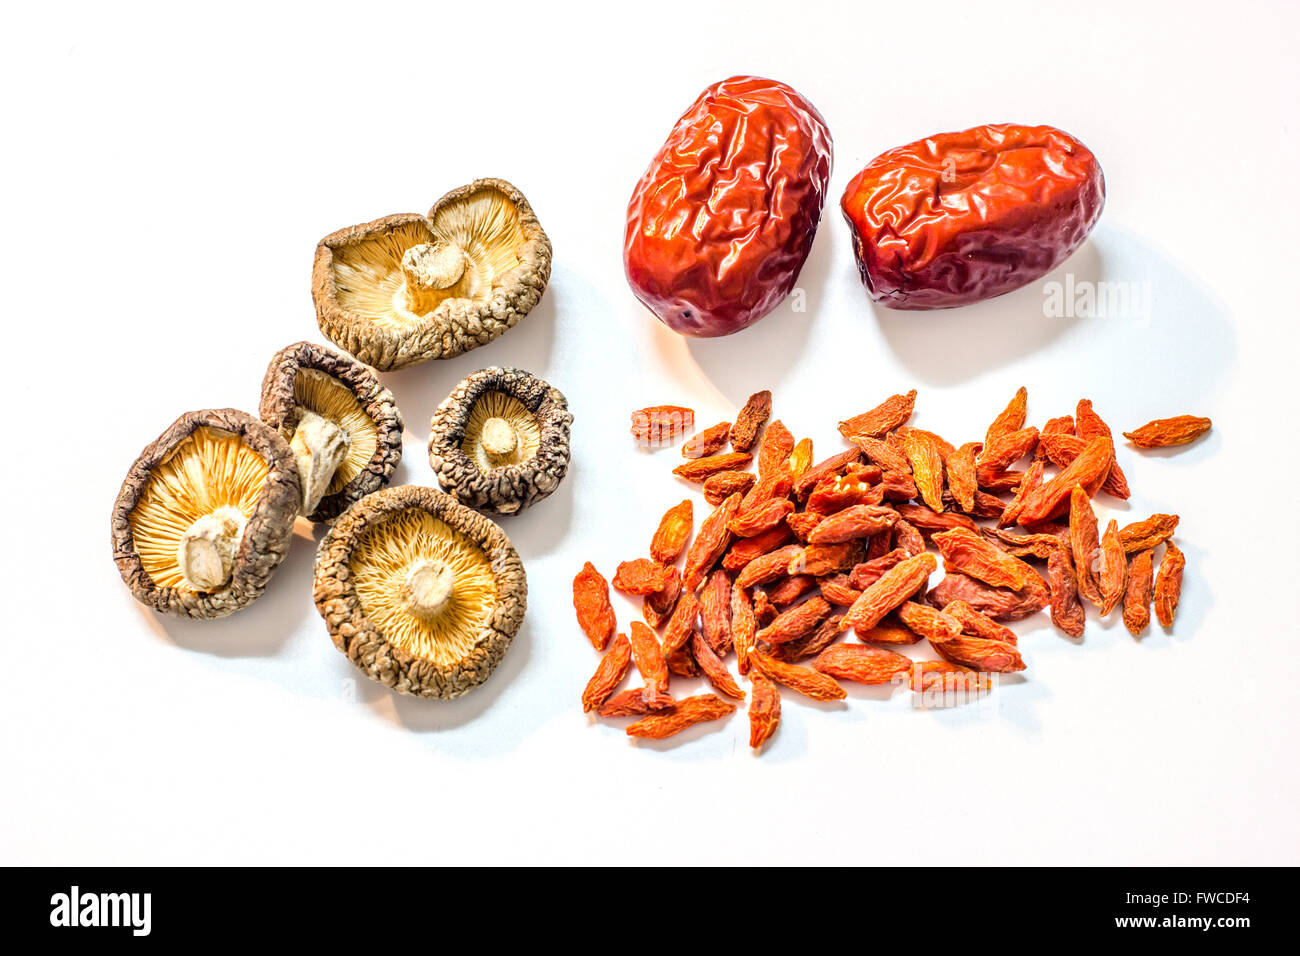 Letinous edodes red dates and Chinese wolfberry Stock Photo